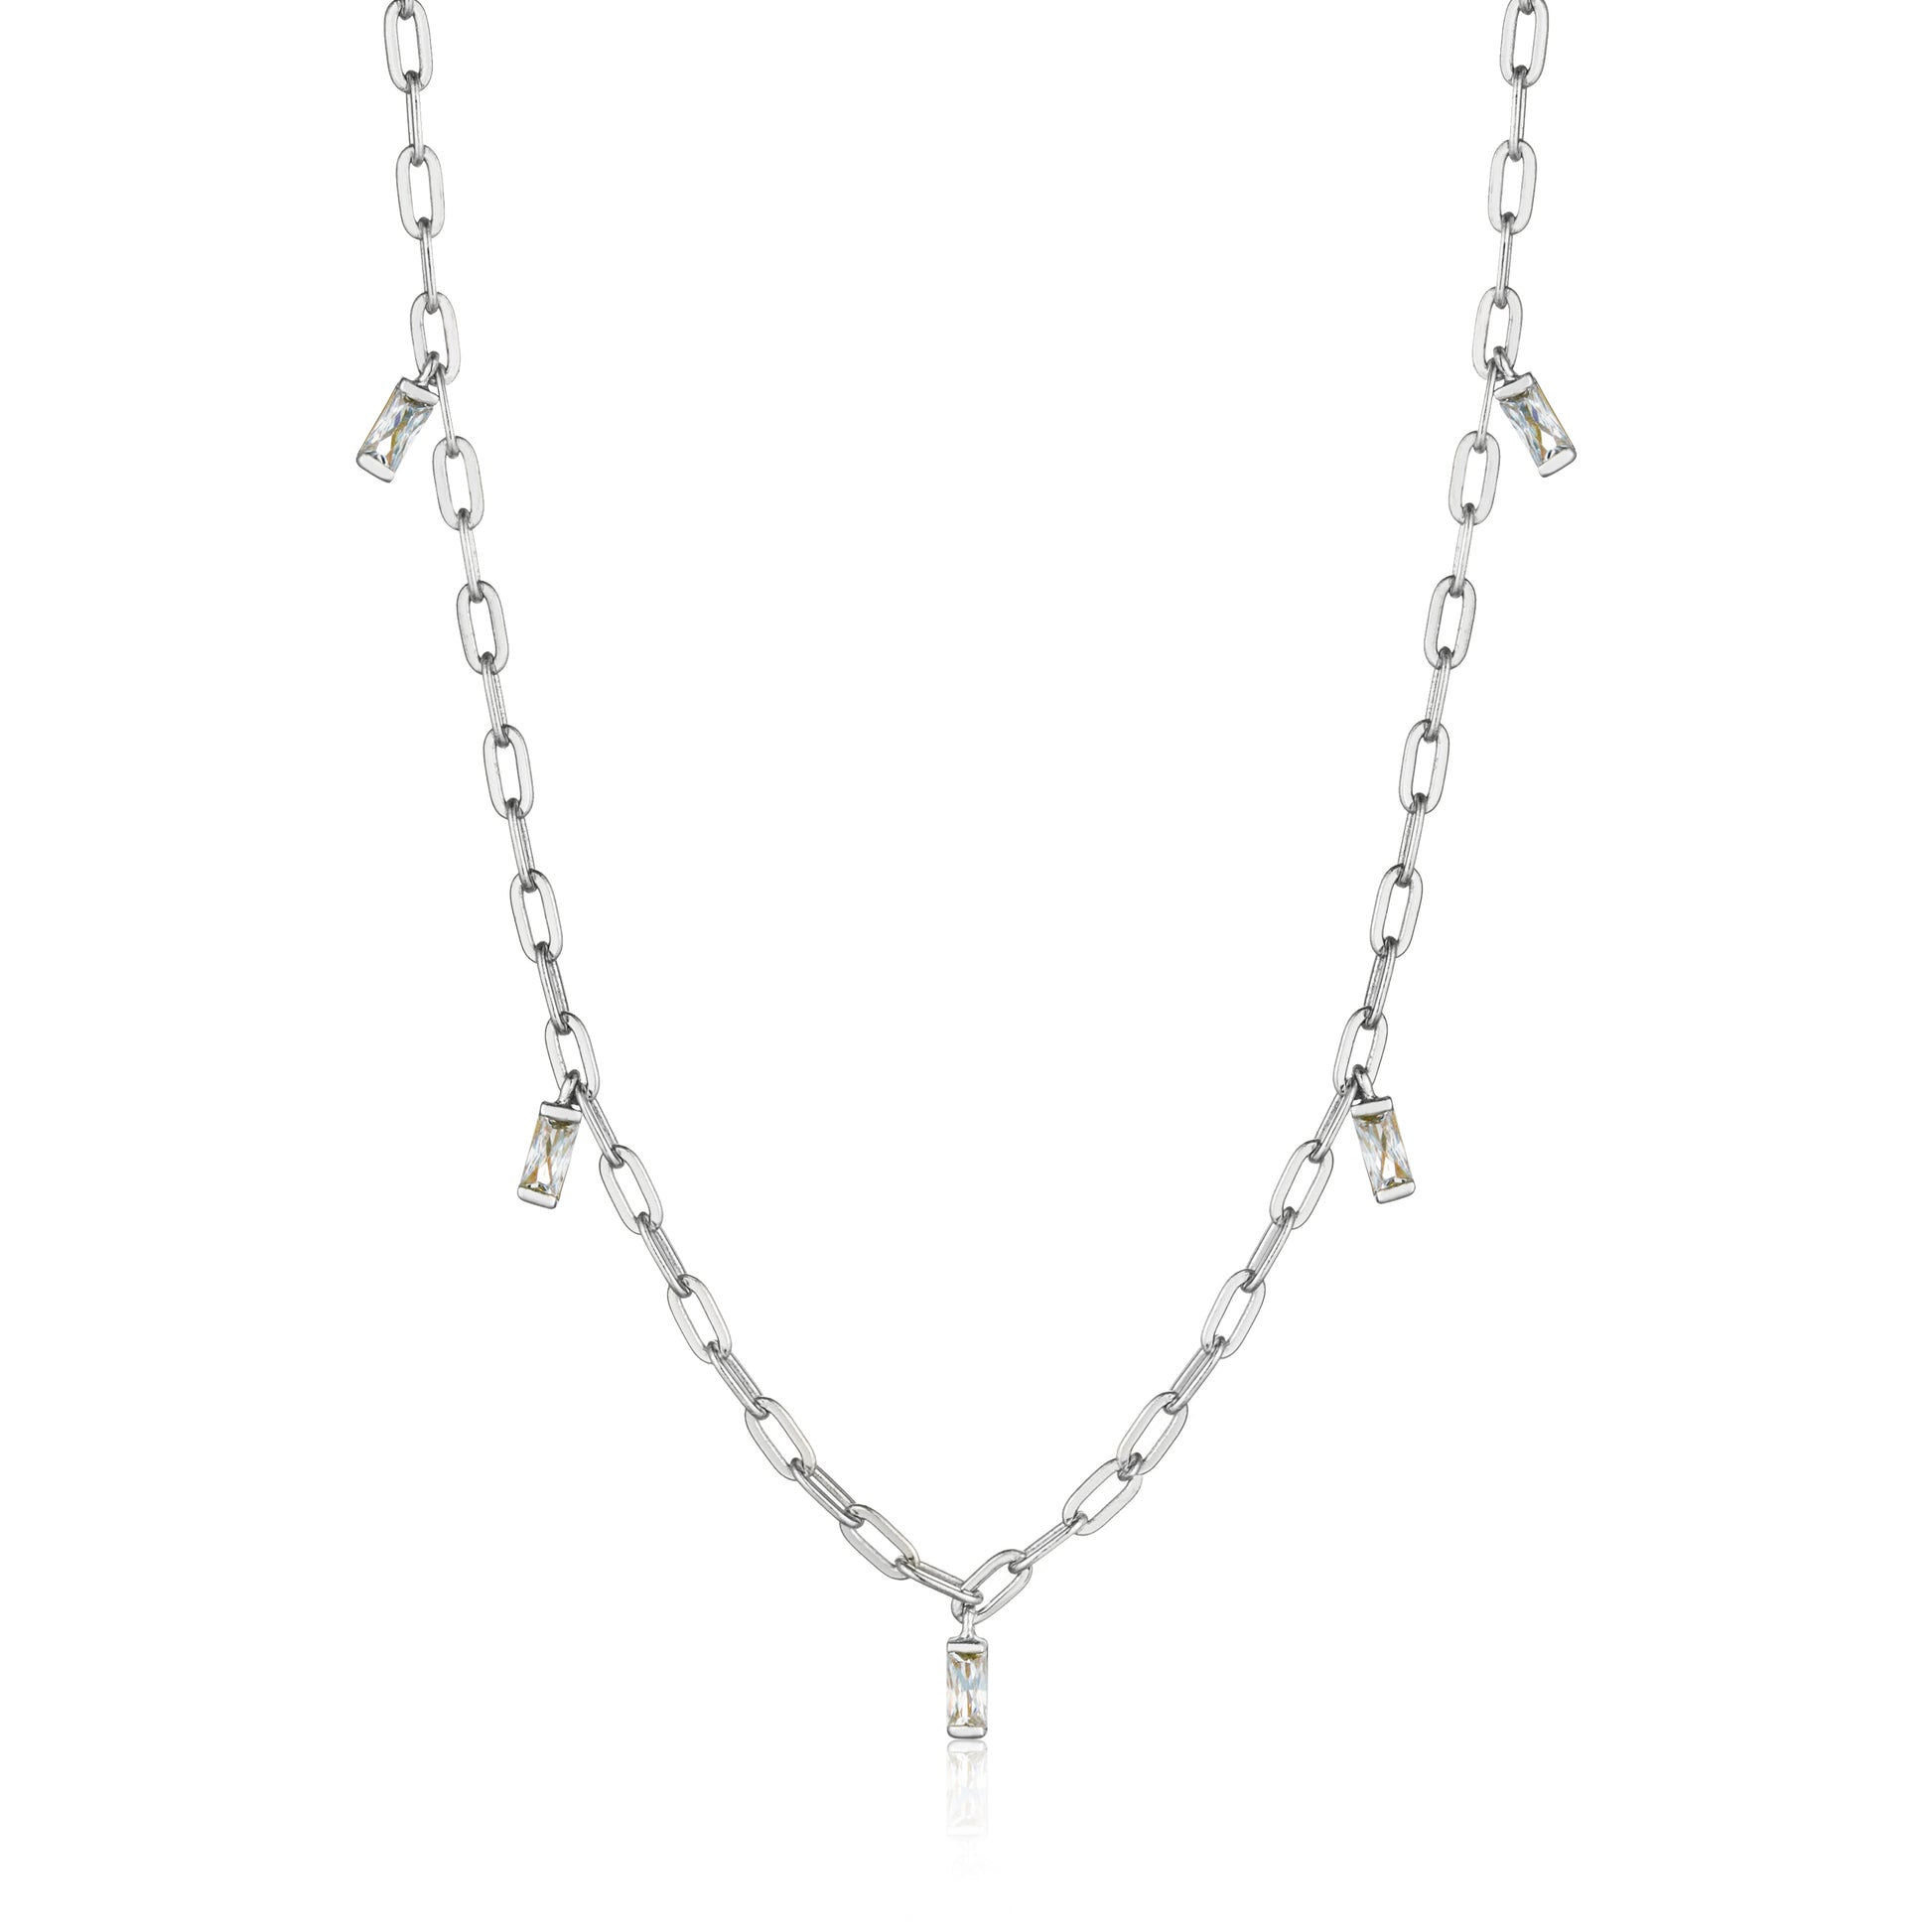 Ania Haie Glow Drop Necklace - Silver Necklace